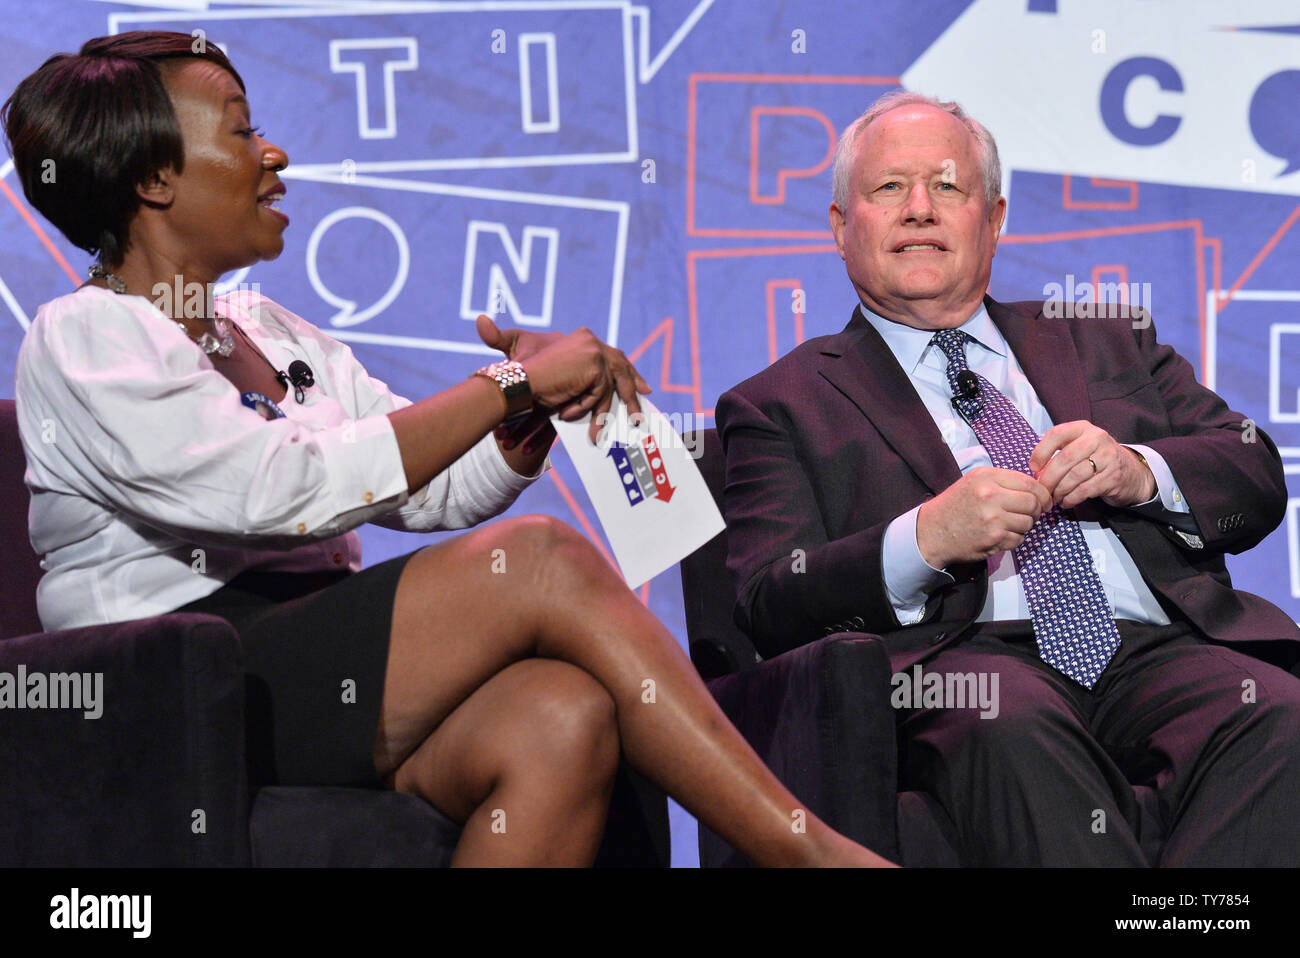 MSNBC host Joy Reid moderates a panel on LBJ with Bill Kristol (pictured), and Mark Updegrove and Rob Reiner (L-R) during Politicon at the Pasadena Convention Center in Pasadena, California on July 29, 2017.  Photo by Jim Ruymen/UPI Stock Photo